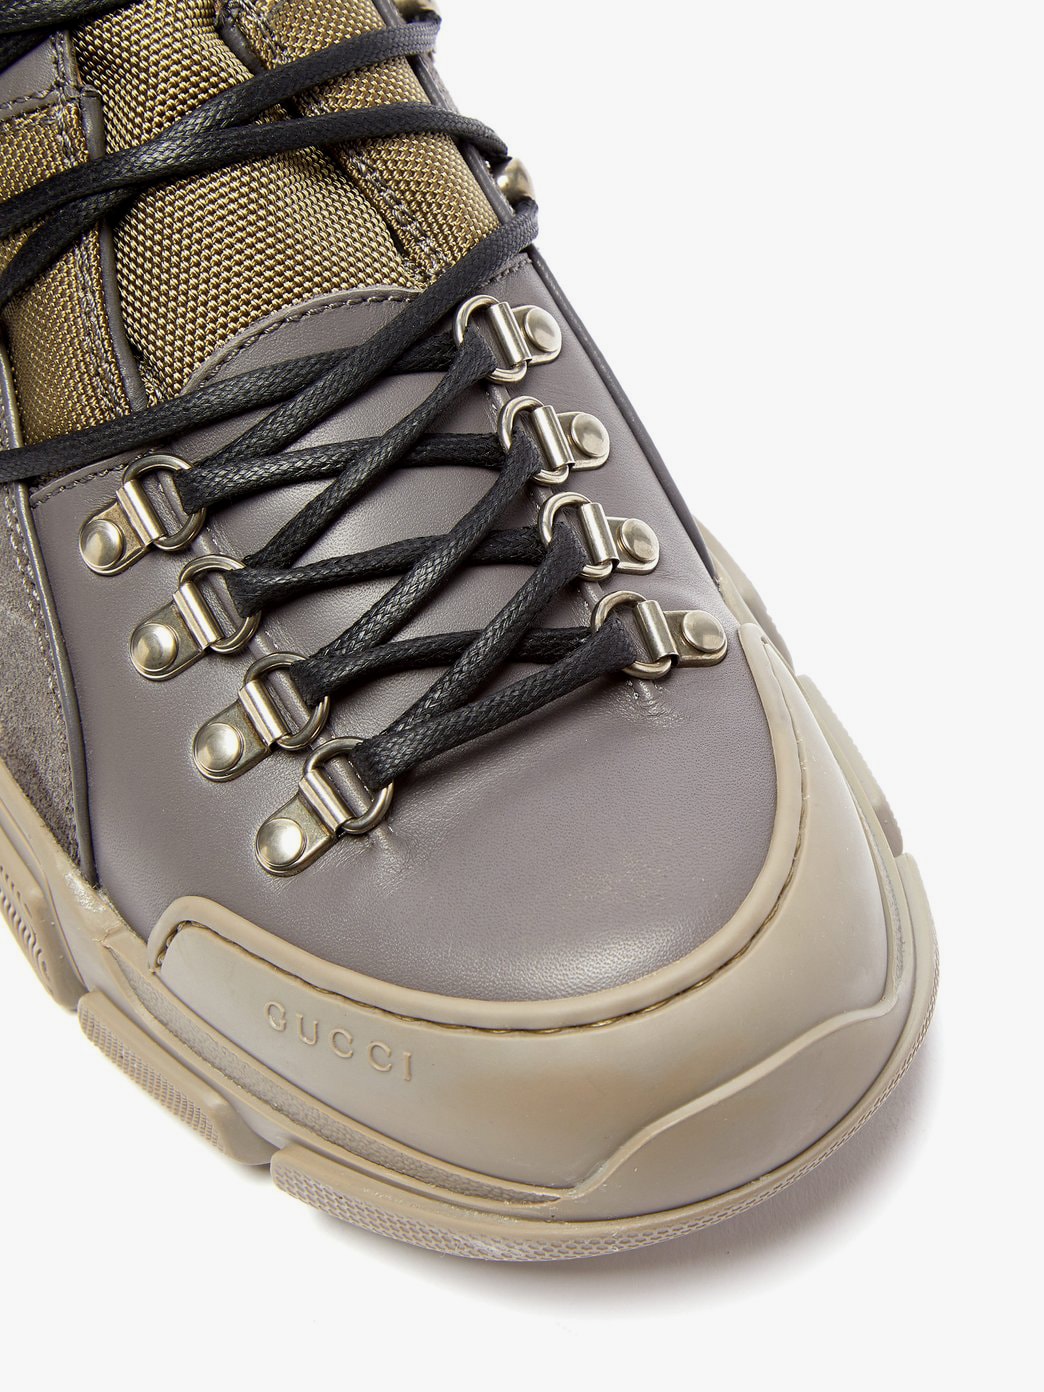 Gucci Flashtrek Hiking Boot Outdoor Sneaker Footwear Trail Chunky Grey Green Matchesfashion.com Release Details Information First Closer Look Shoes Trainers Walking